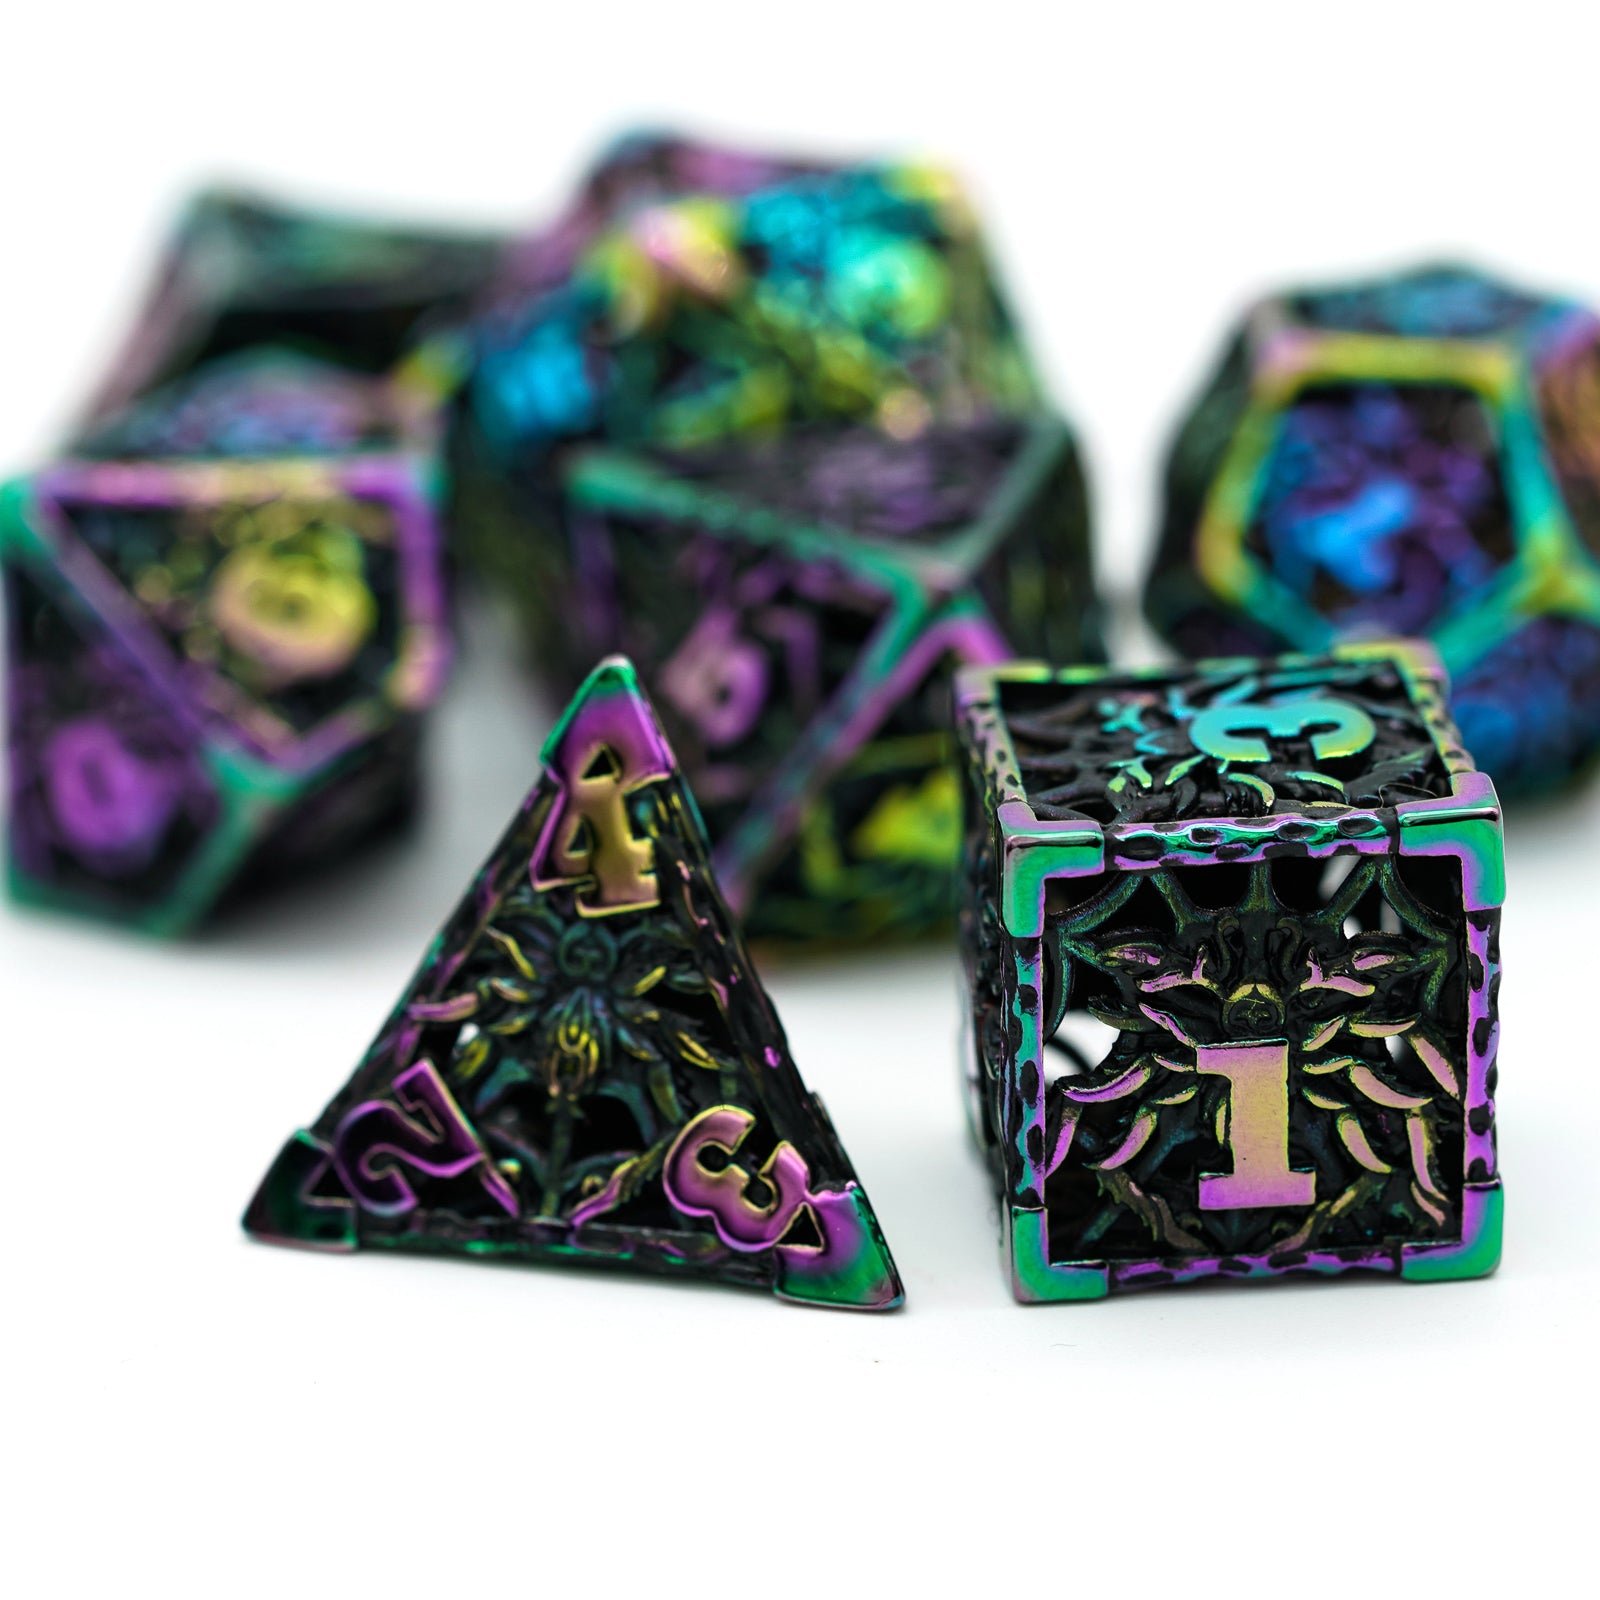 d4 and d6 dark multicolored metal dice highlight